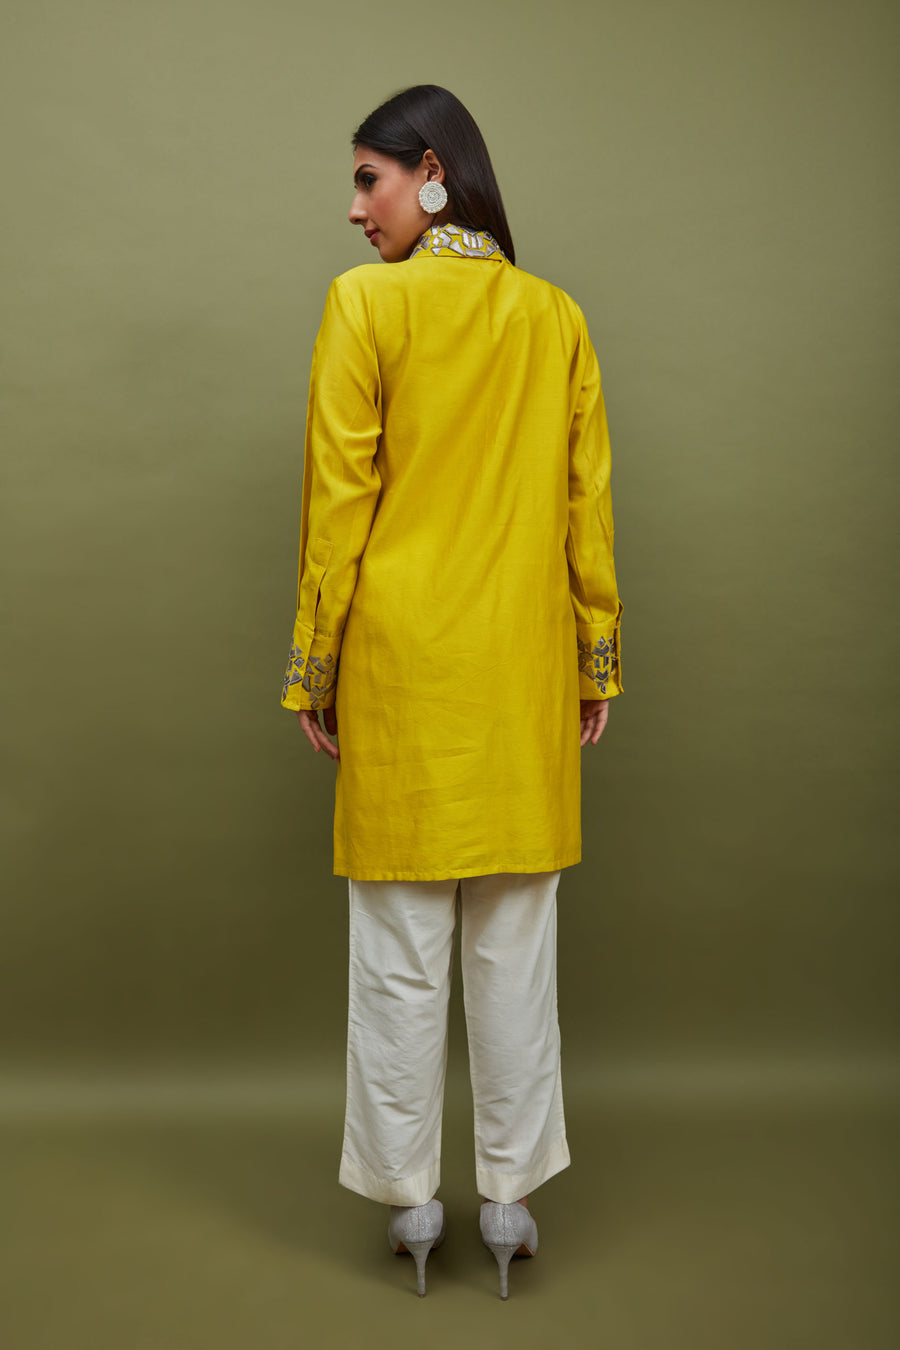 Yellow pleated shirt with slim pant